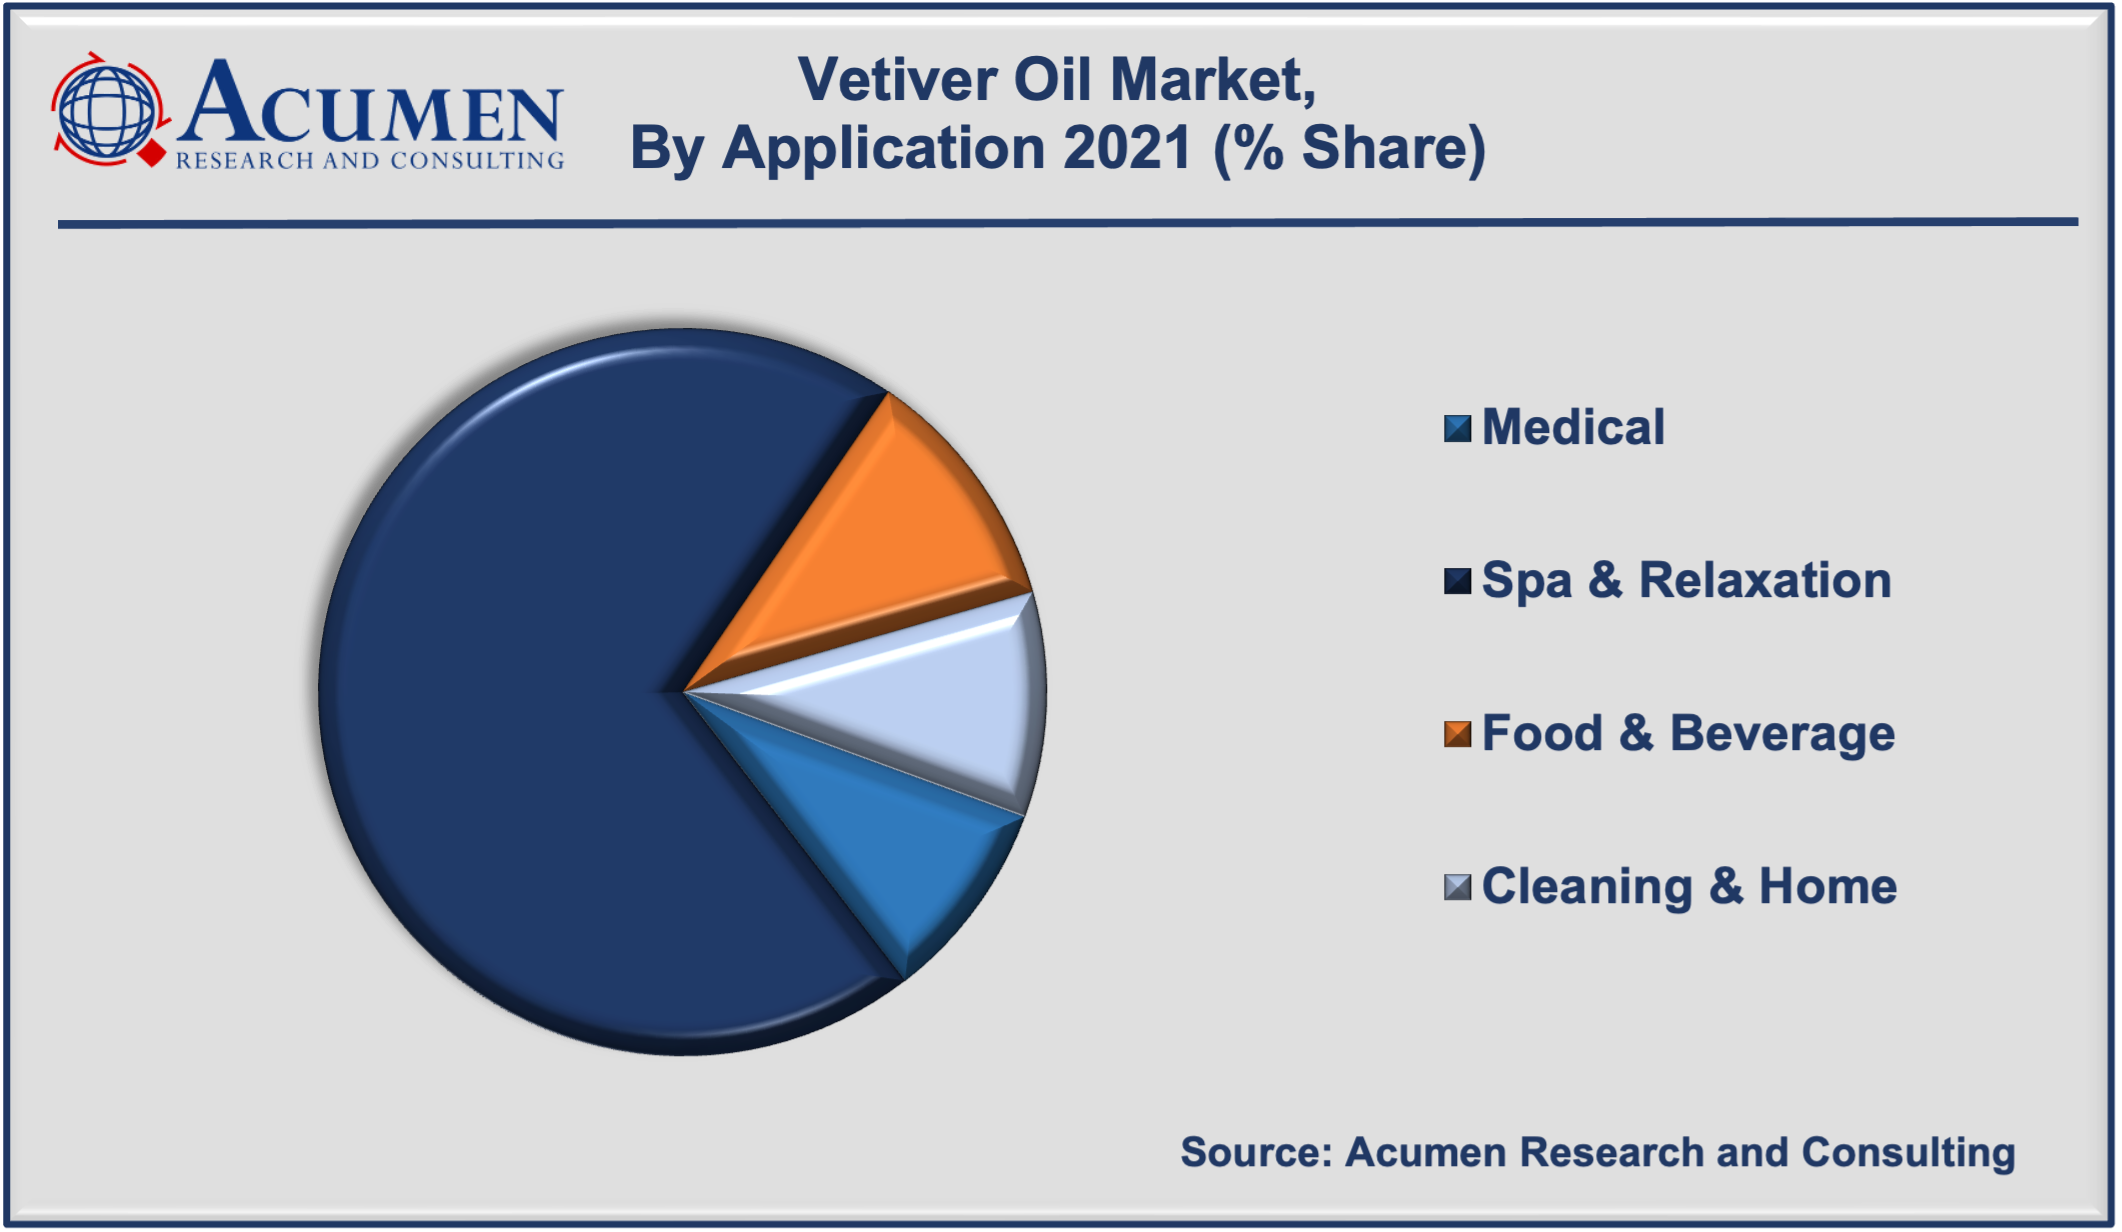 Vetiver Oil Market Size is expected to reach the market value of USD 126 Million by 2030 growing at a significant CAGR of 9.2% during the forecast period from 2022 to 2030.